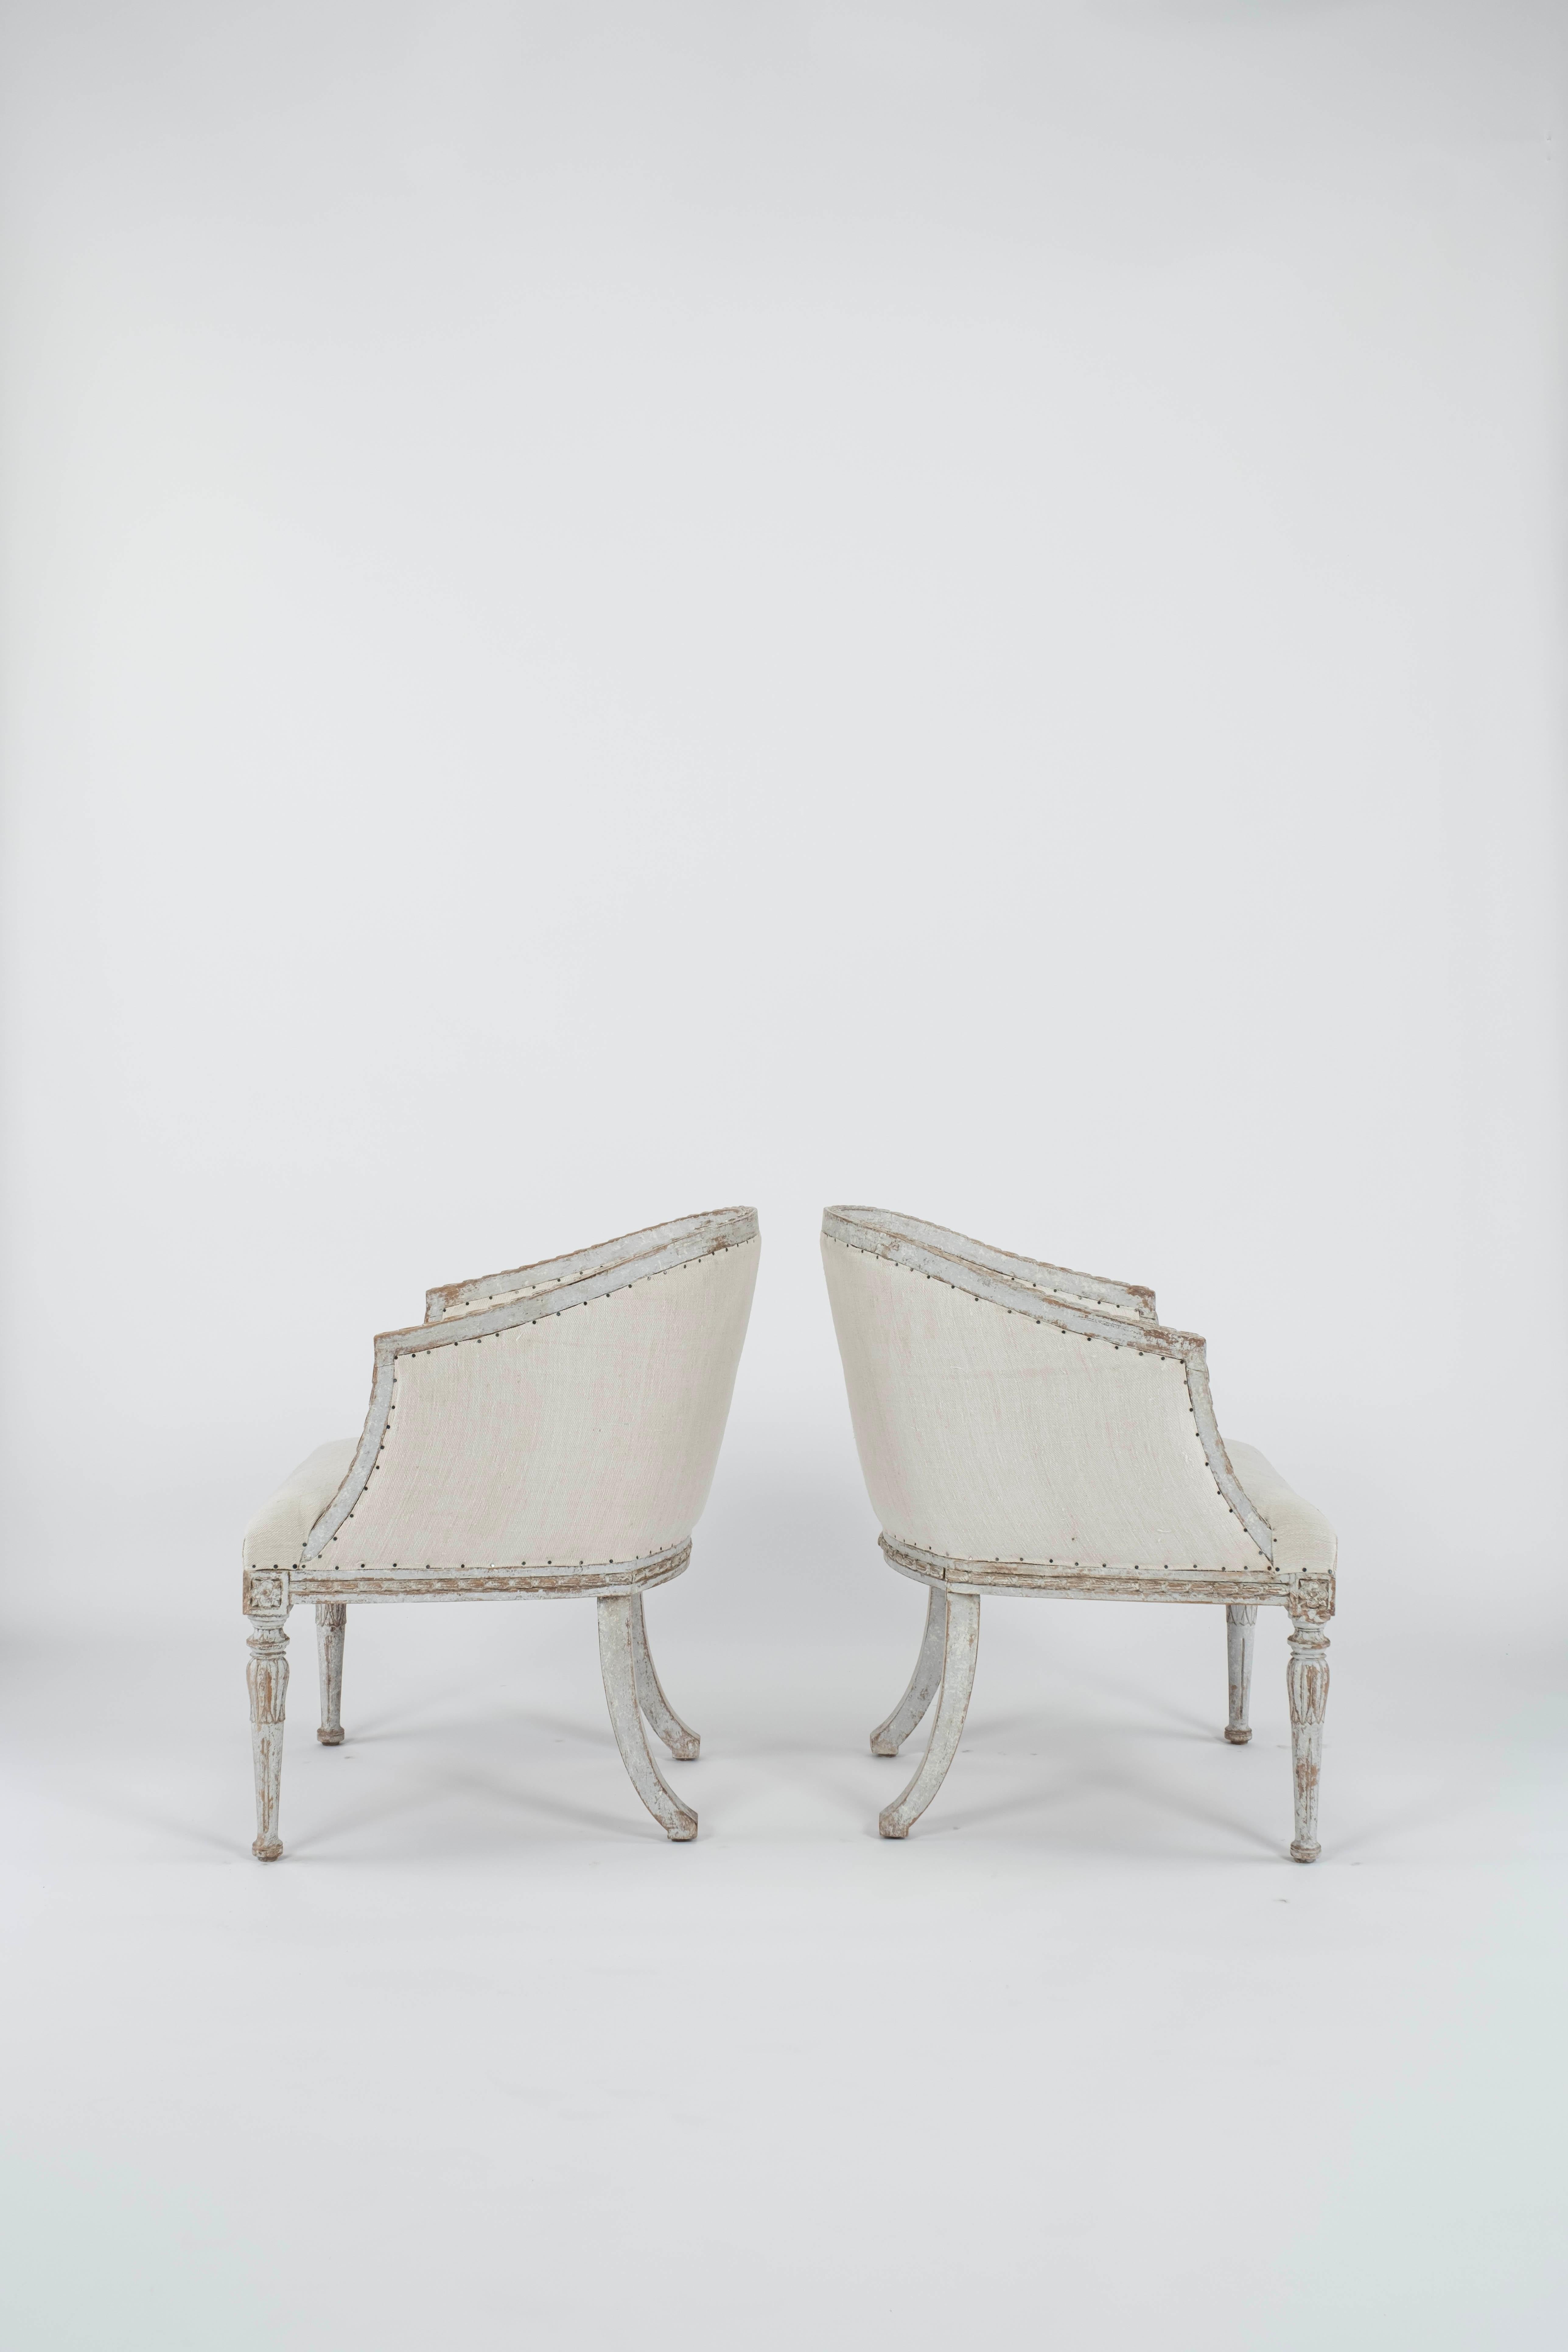 19th Century Pair of Swedish Gustavian Chairs For Sale